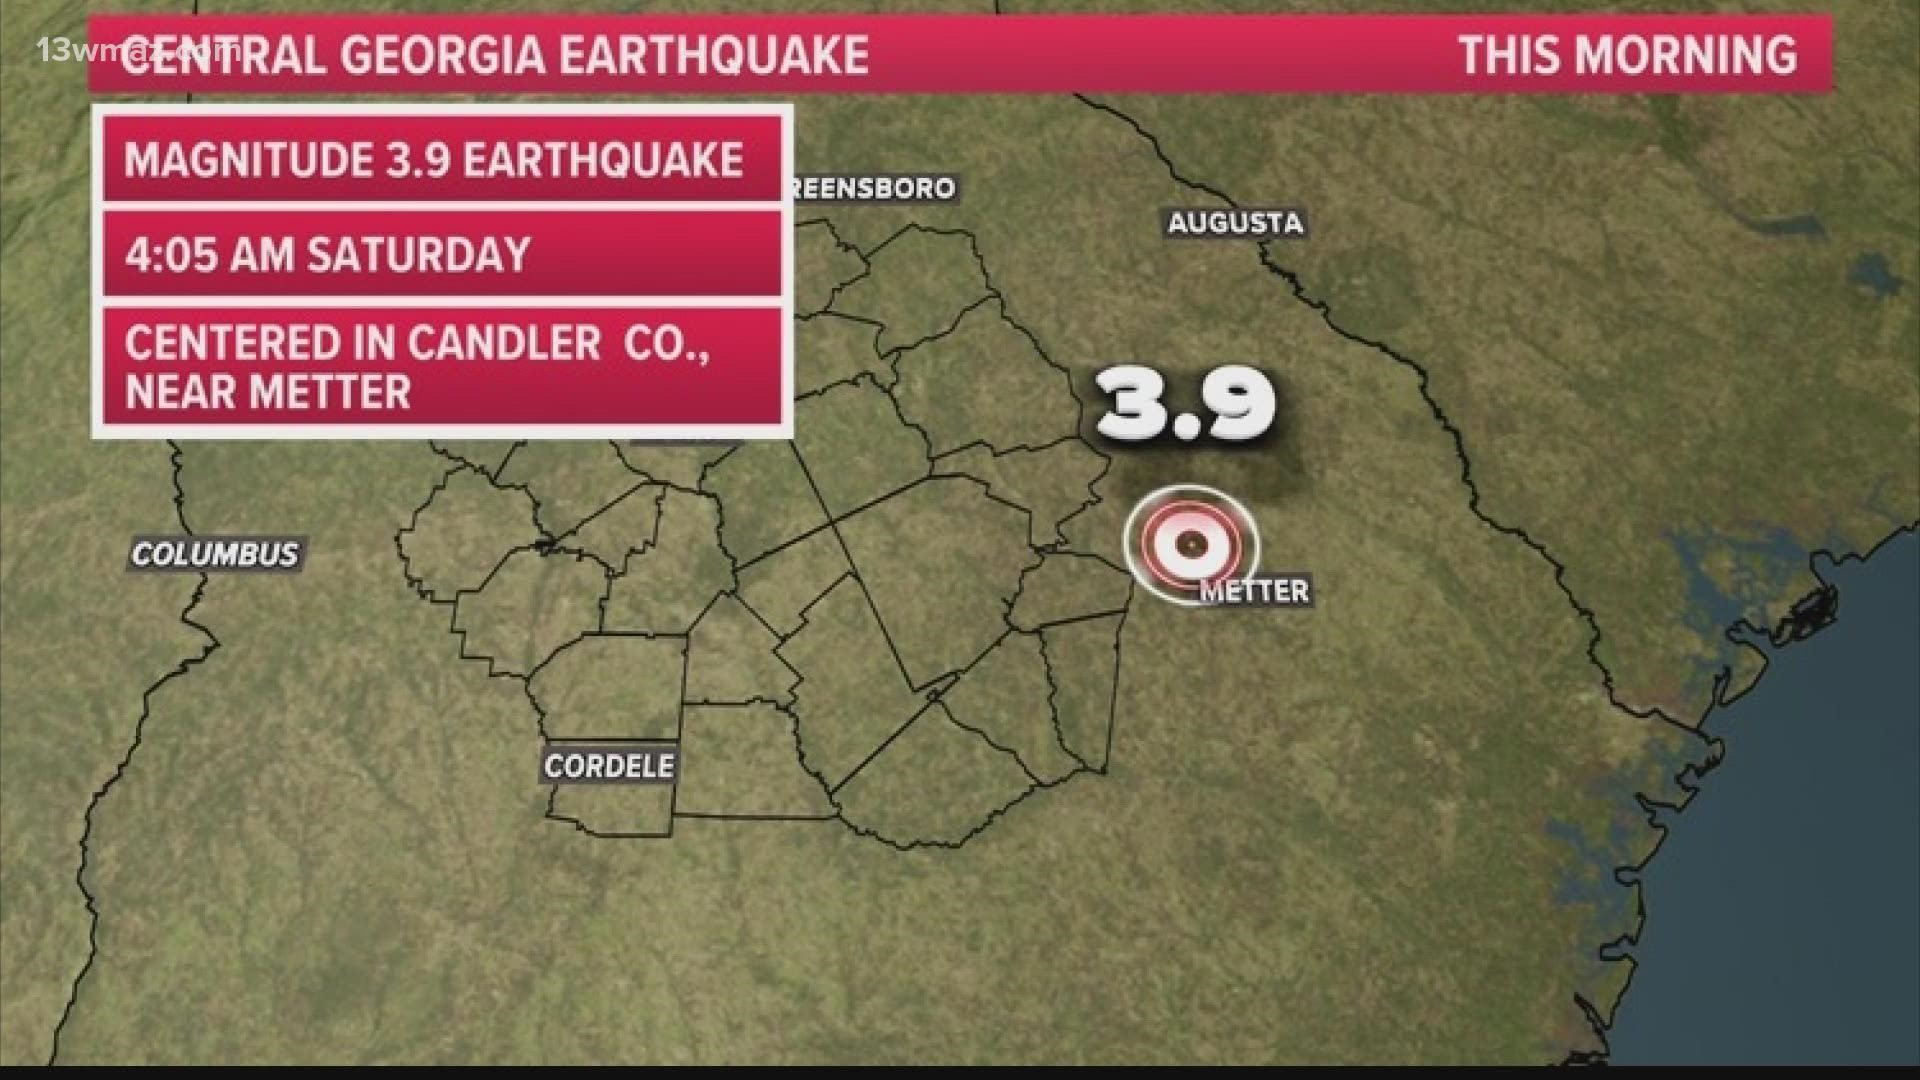 The United States Geological Survey says a magnitude 3.9 earthquake struck just outside of Metter, Ga.